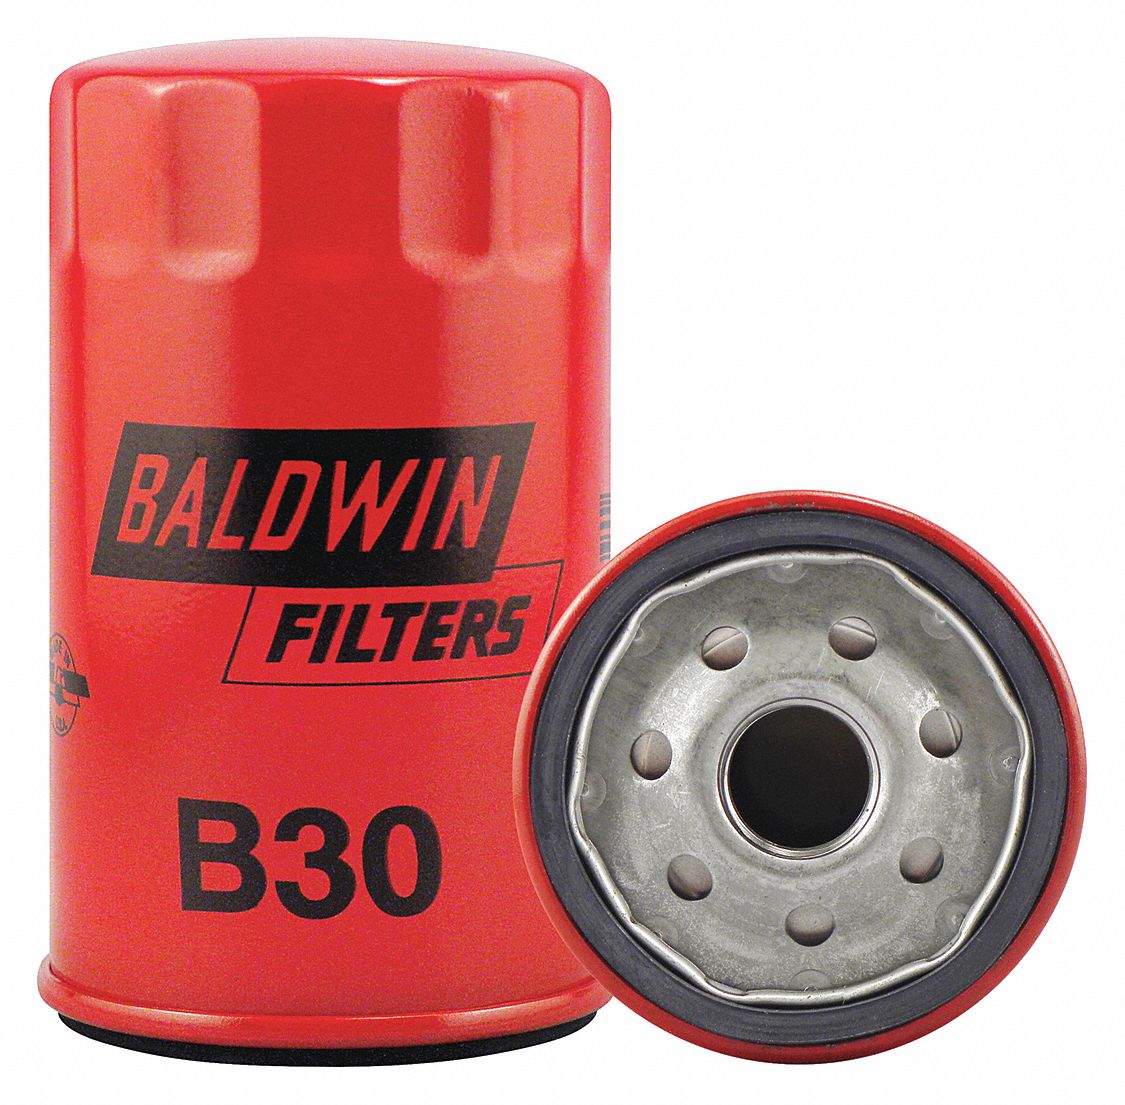 BALDWIN FILTERS  Spin On Oil  Filter  Length 5 1 8 